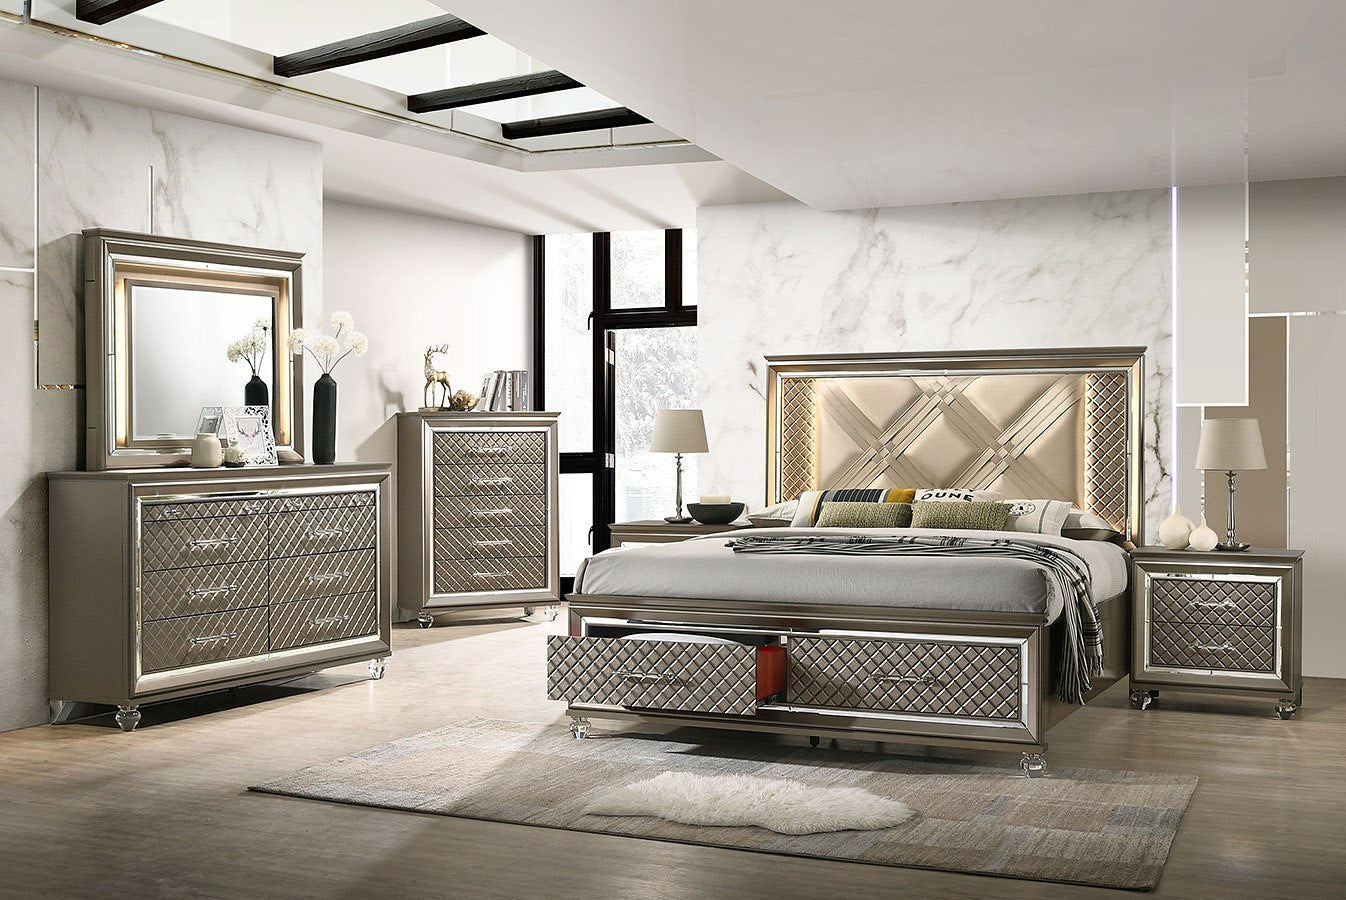 Queen Size Storage Bed in Antique Platinum Finish By: Alabama Beds